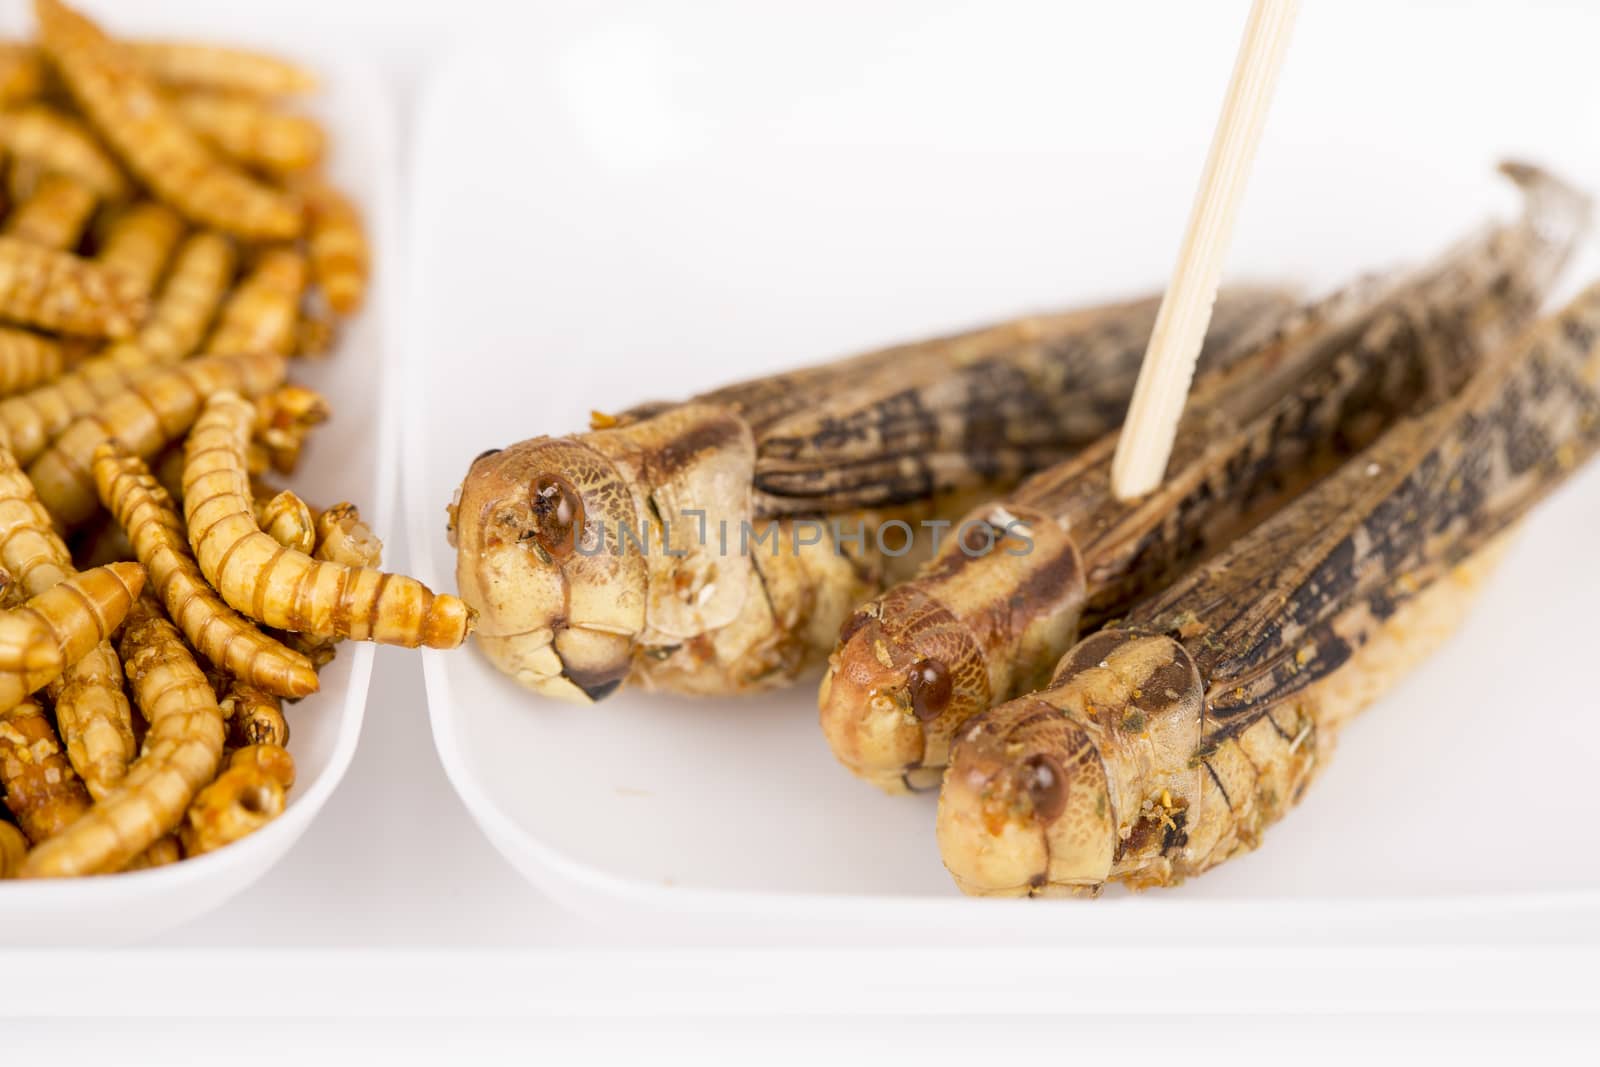 Fried crickets molitors locusts insects by CatherineL-Prod